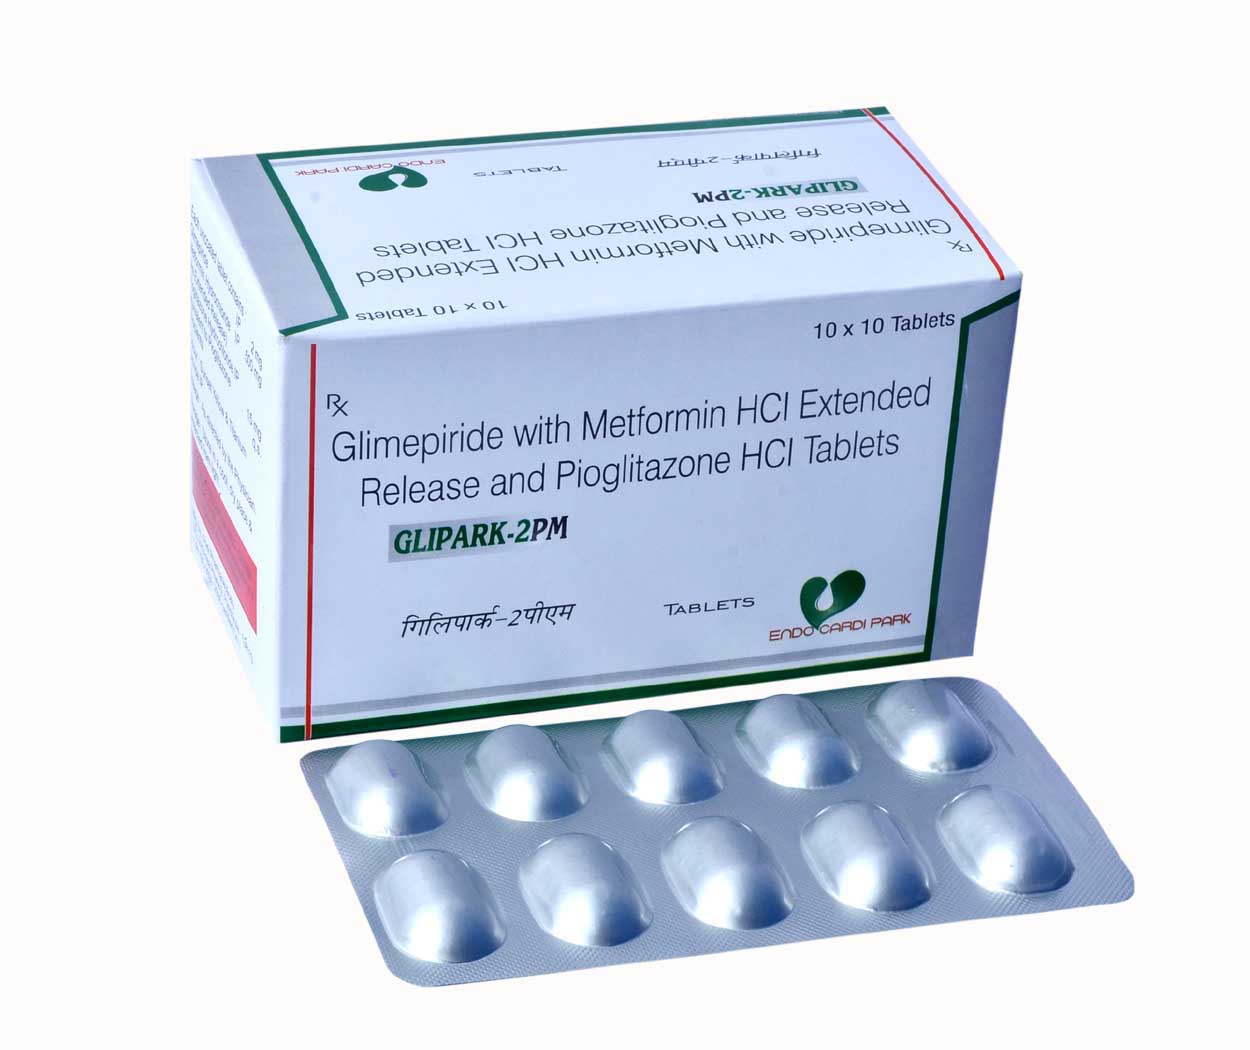 Product Name: GLIPARK 2PM, Compositions of GLIPARK 2PM are Glimepiride with Metformin HCI Extended Release and Pioglitazone HCI Tablets  - Park Pharmaceuticals